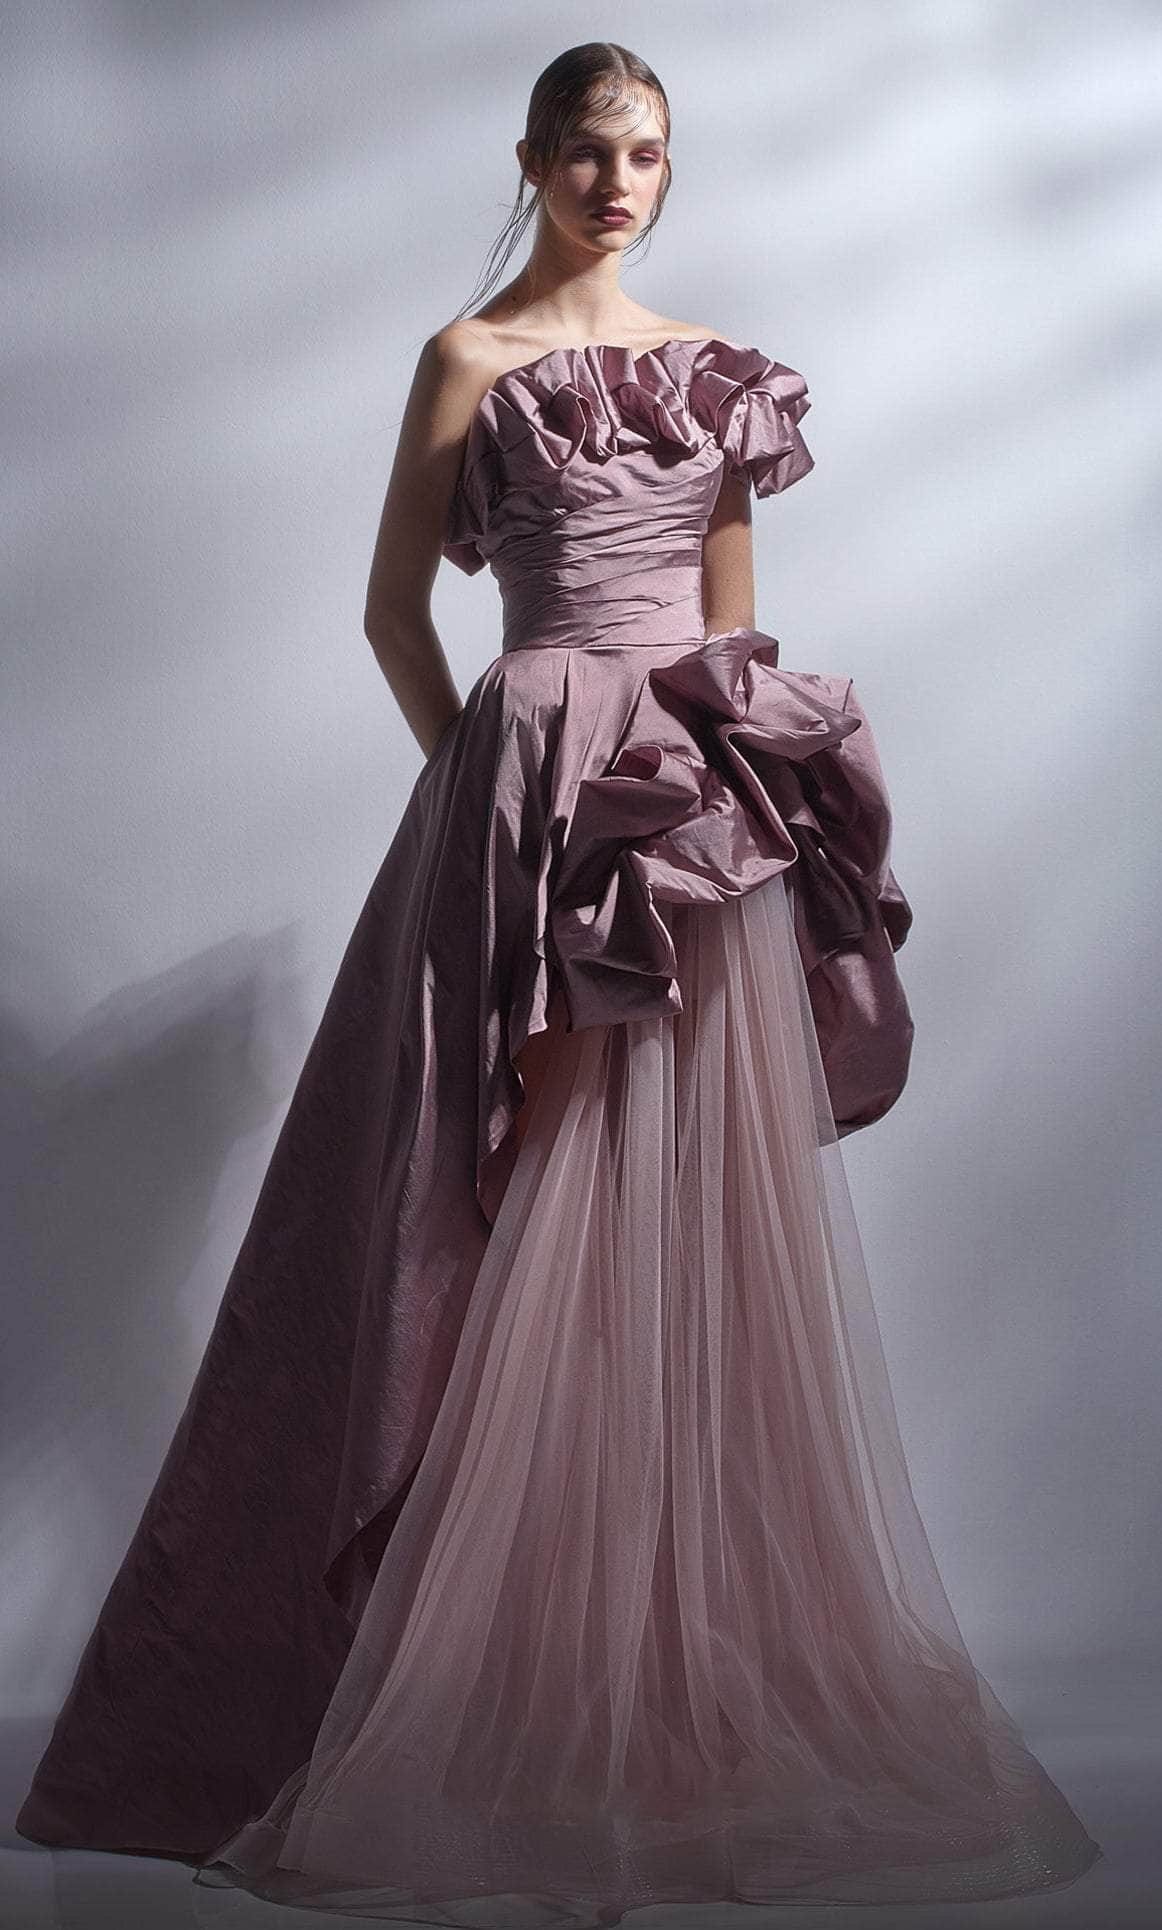 Image of MNM Couture G1257 - Ruffled Taffeta A-line Gown